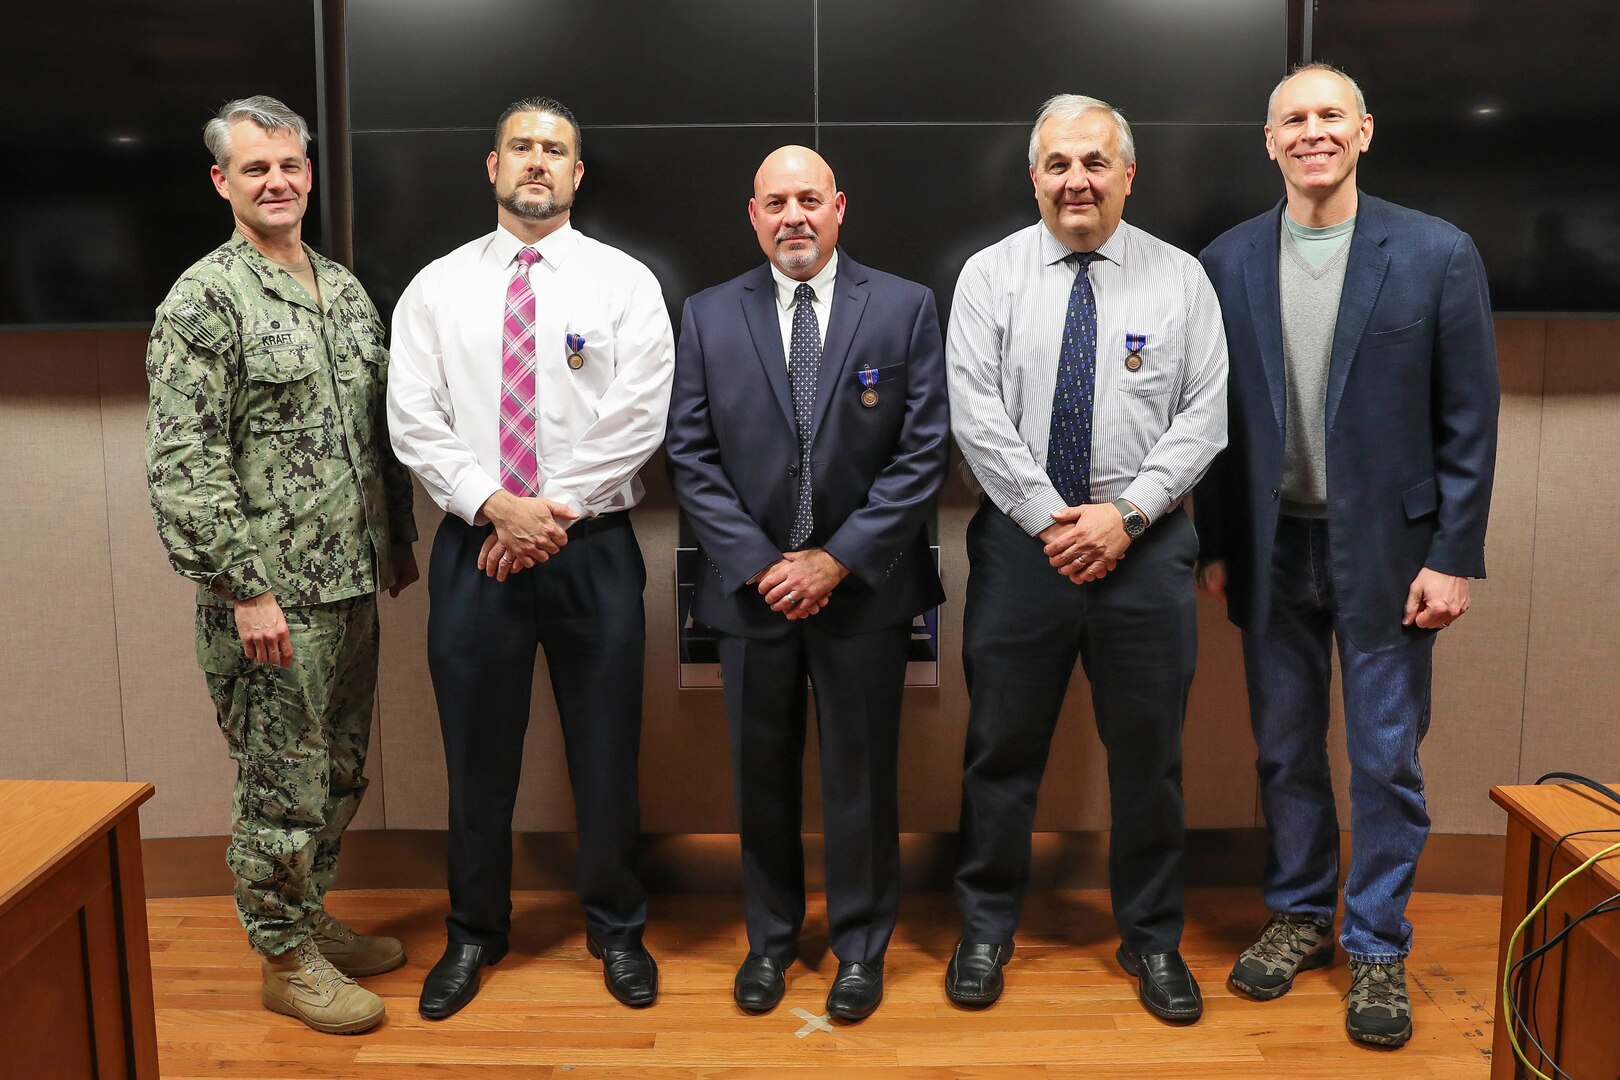 Human Resources Director Bill Shea, Systems Engineering Department Head Mike Thornton and retired Mechanical Engineer Gregory Harris received Department of the Navy Meritorious Civilian Service Awards from NSWC IHEODTD Commanding Officer Capt. Scott Kraft and Technical Director Ashley Johnson. Not pictured: Chemical, Biological and Radiological Defense Division Principal Engineer Bruce Corso. (U.S. Navy photo by Matt Poynor)